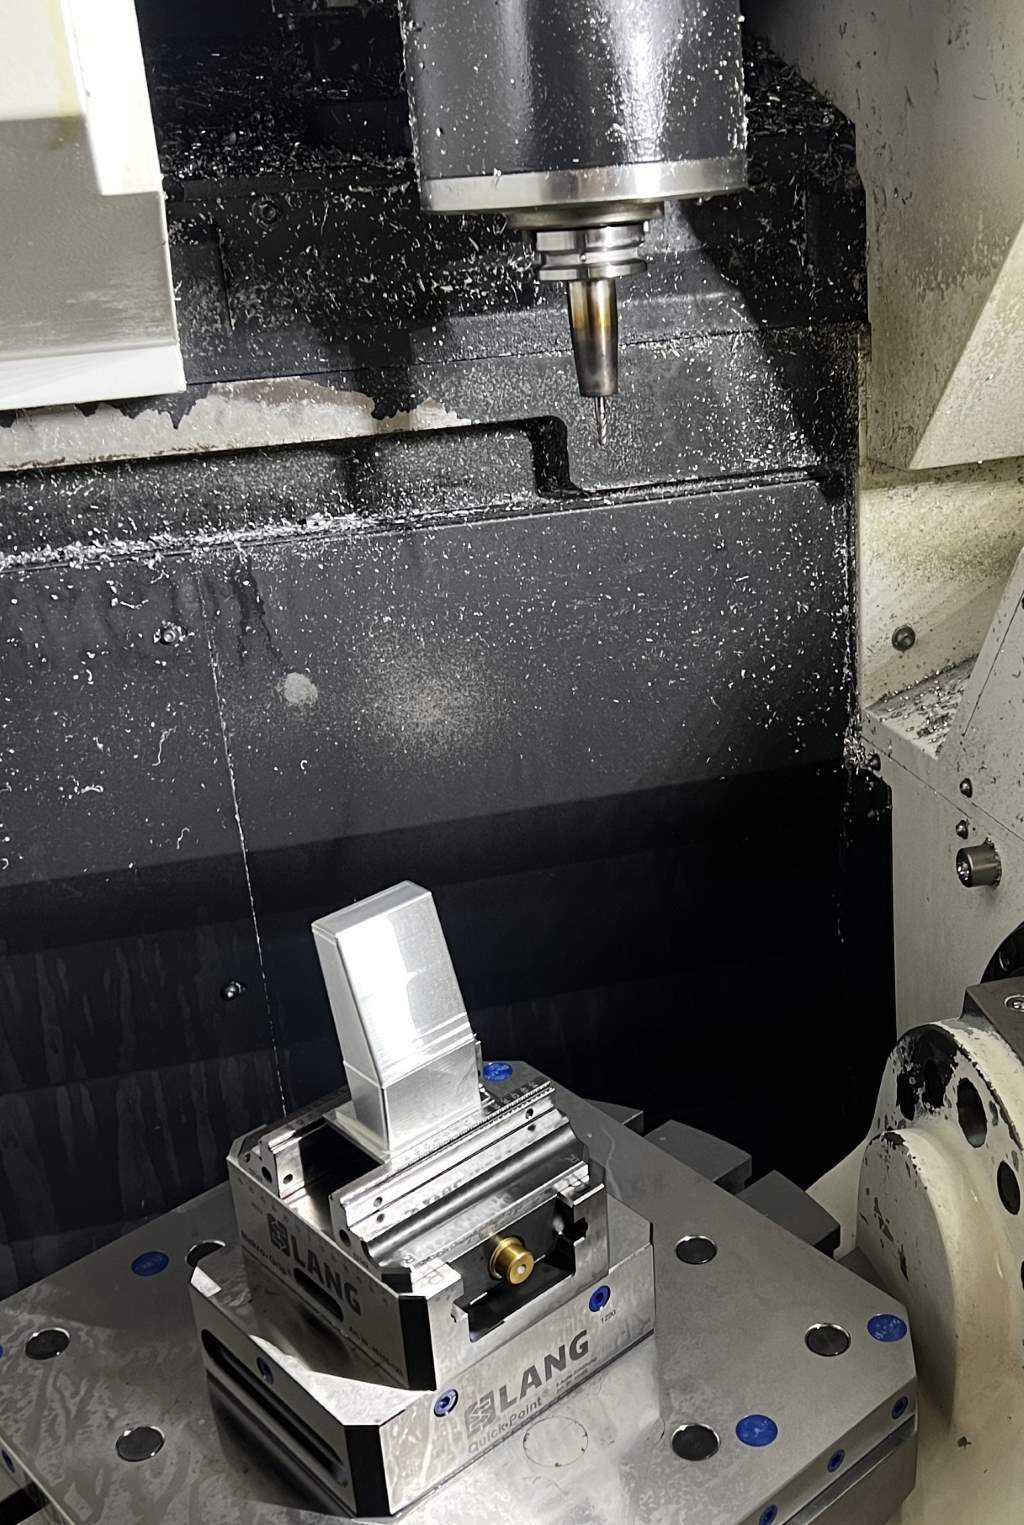 5-axis machining being carried out on the Mazak i500 Variaxis at PBE CNC